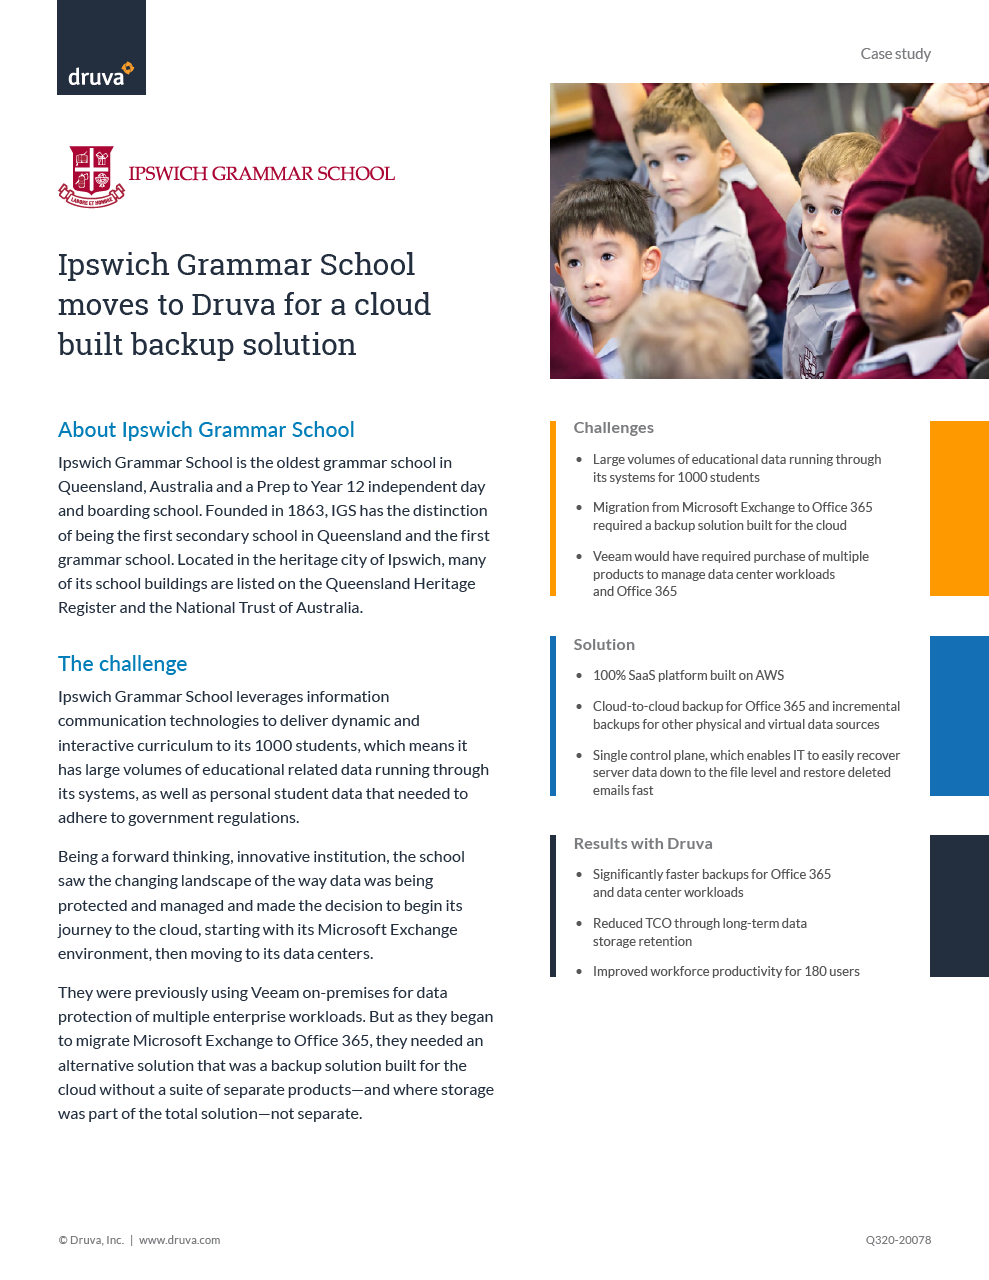 Ipswich Grammar School moves to Druva for a cloud built backup solution